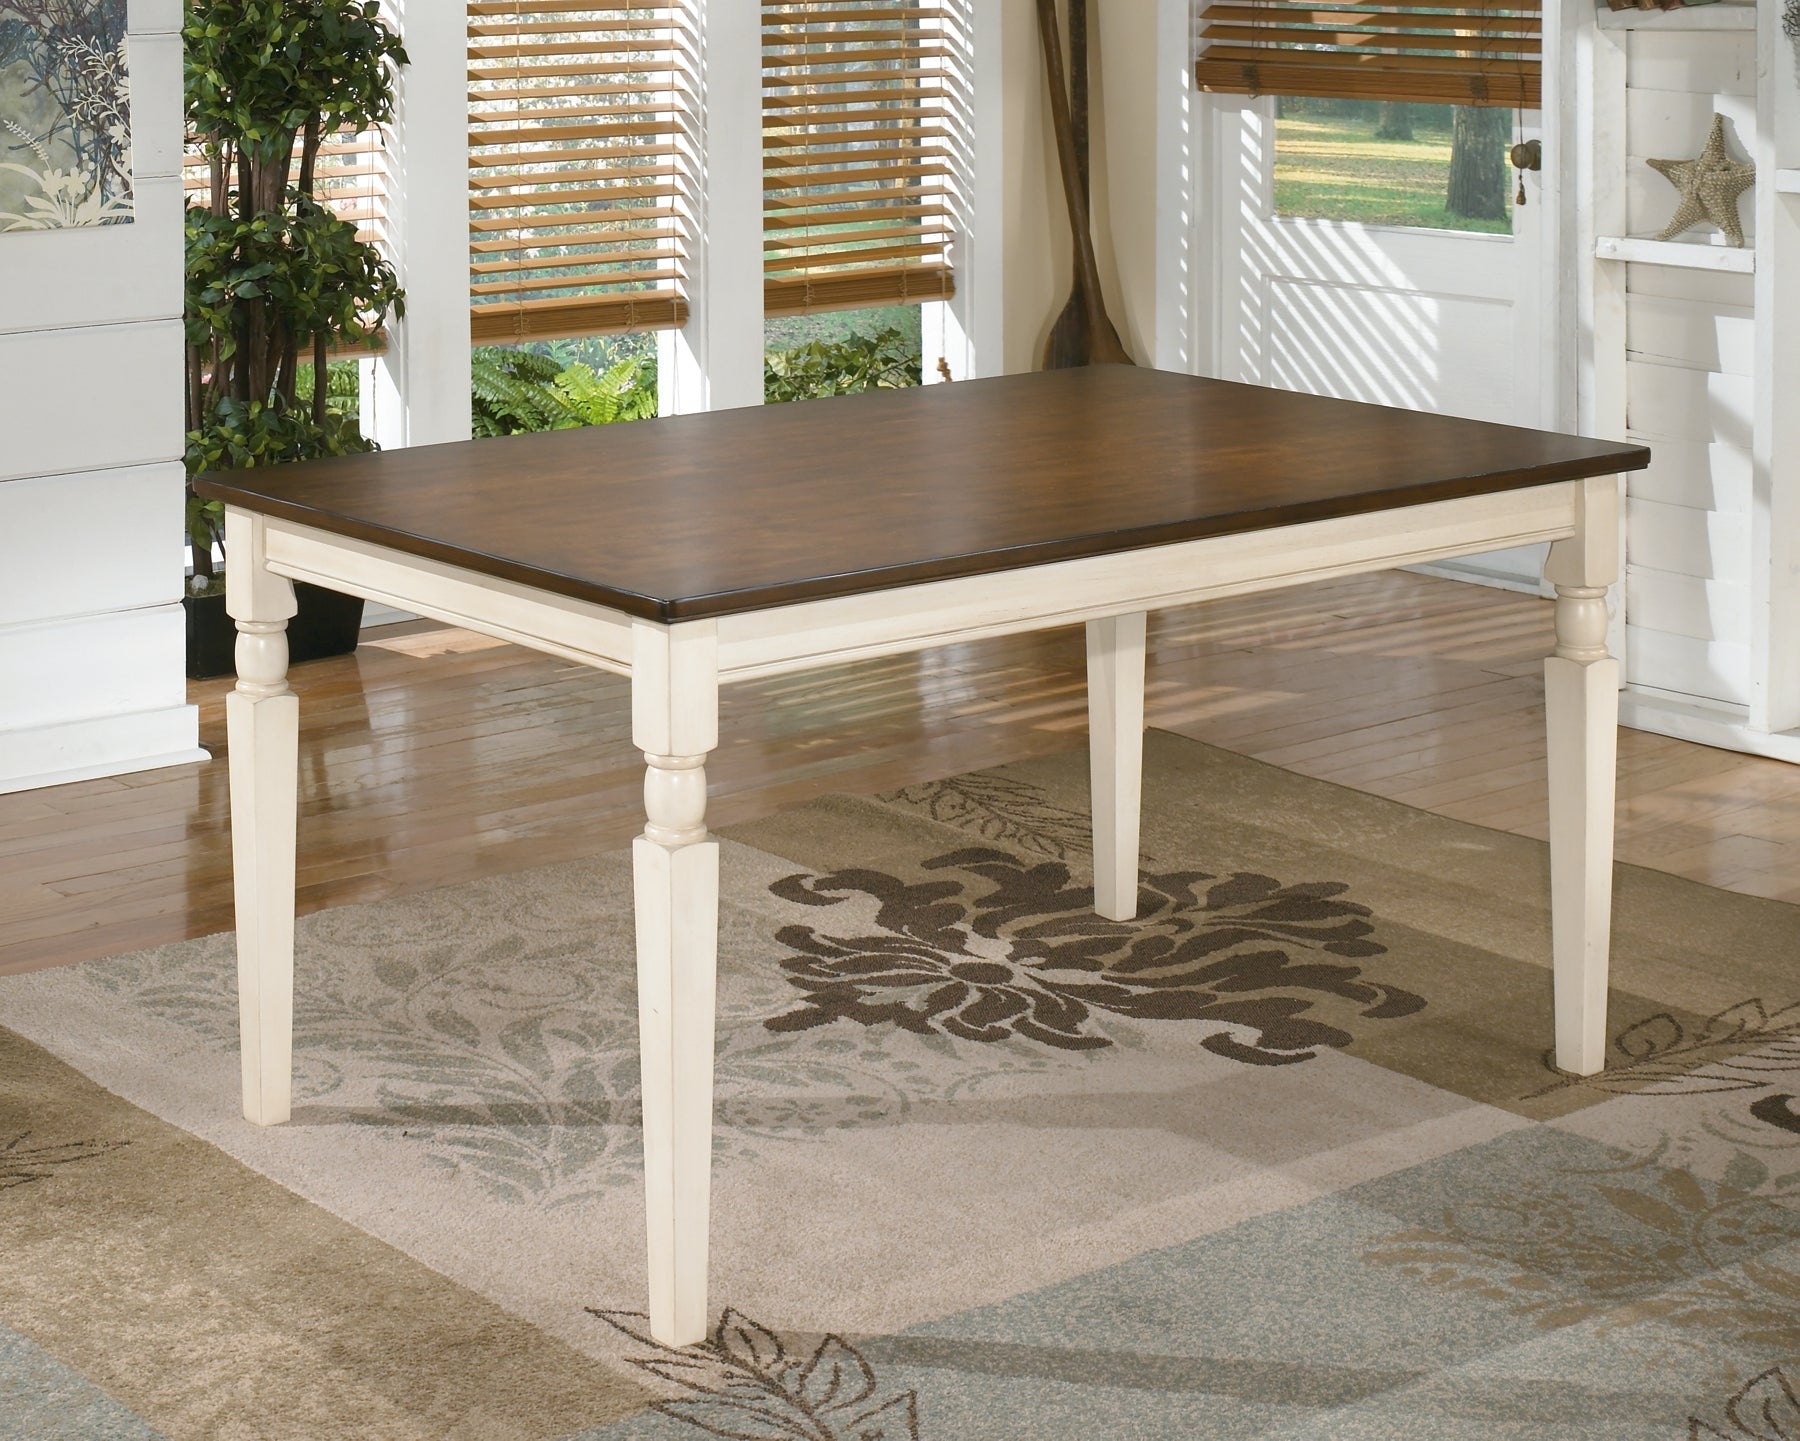 Whitesburg Dining Table and 4 Chairs with Storage at Cloud 9 Mattress & Furniture furniture, home furnishing, home decor